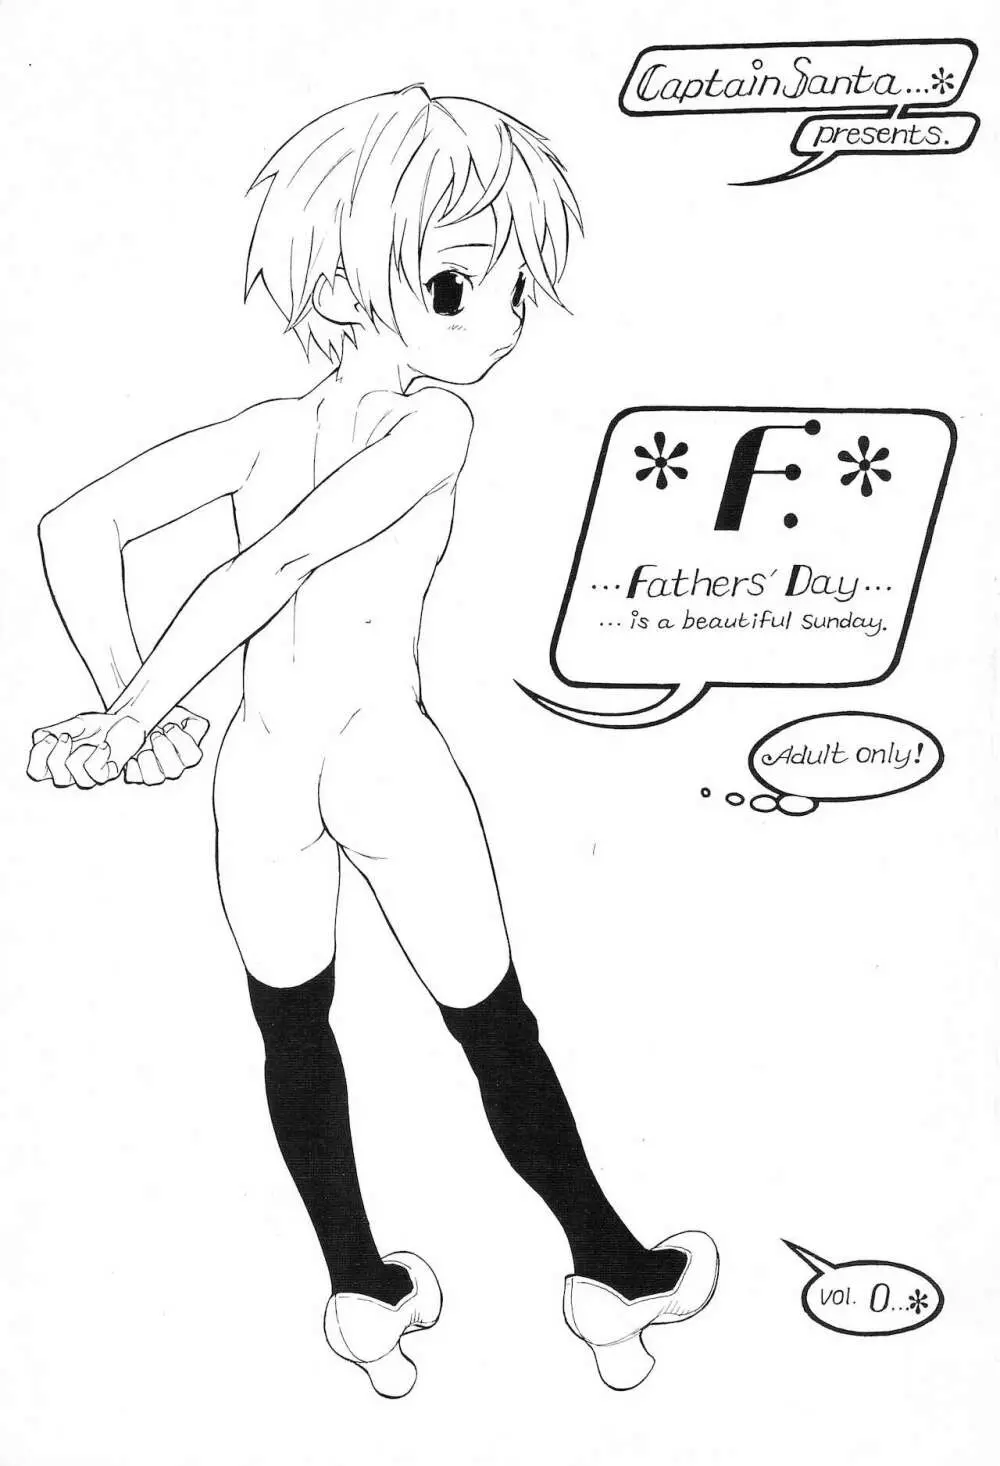 F. Fathers’ Day Vol.0